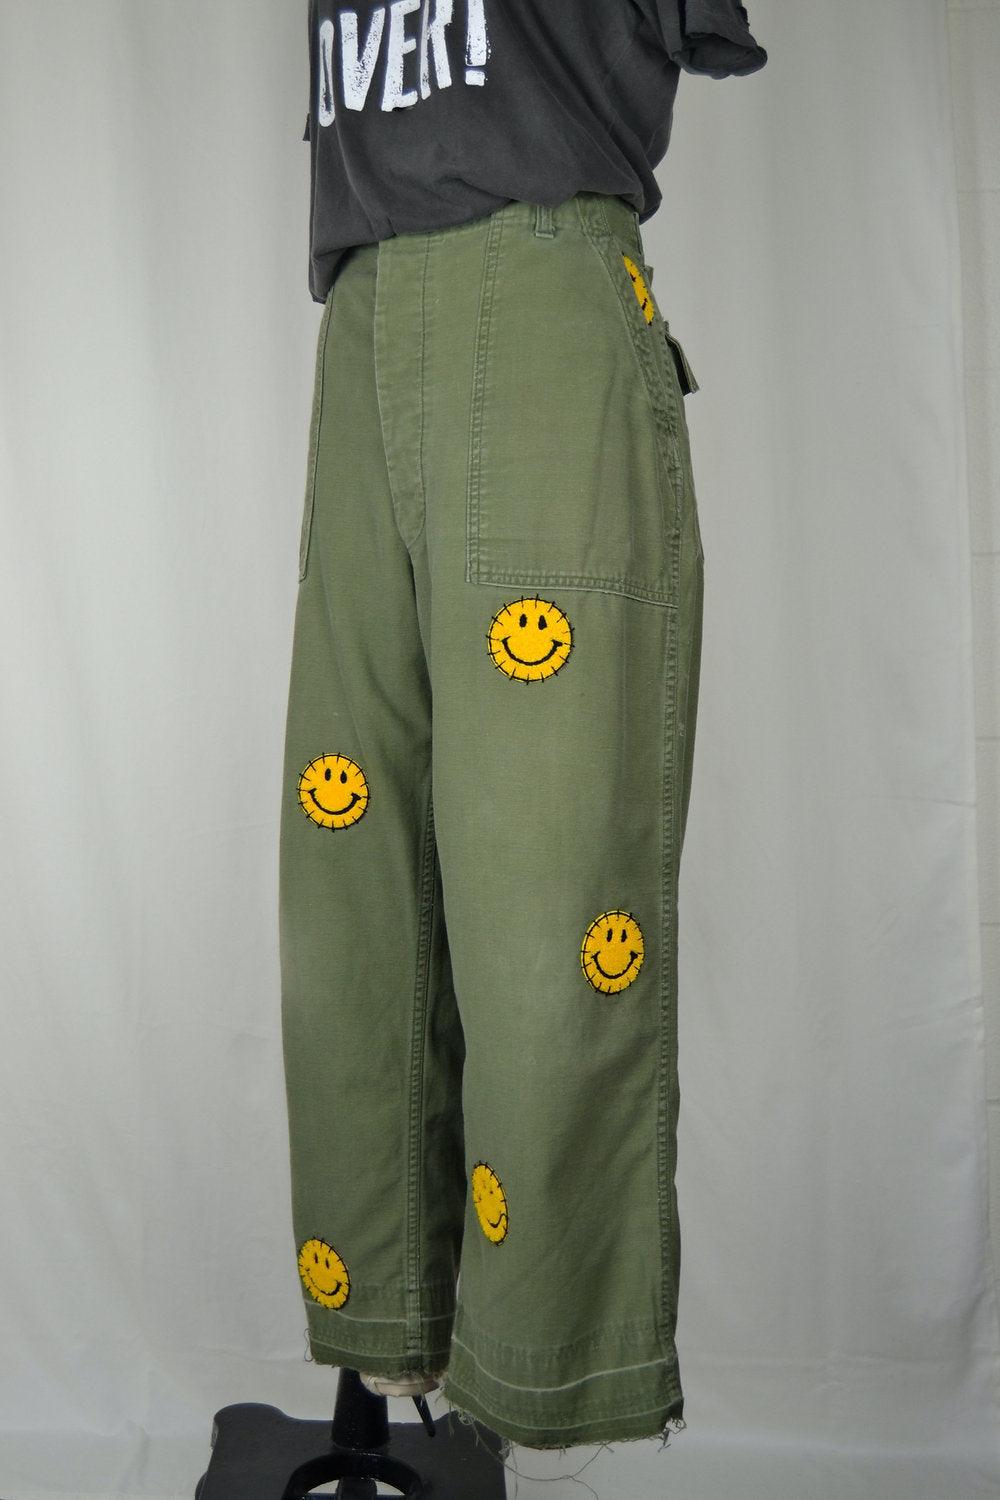 Good Vibes Smiley Utility Pants by Rank & Sugar - Haven